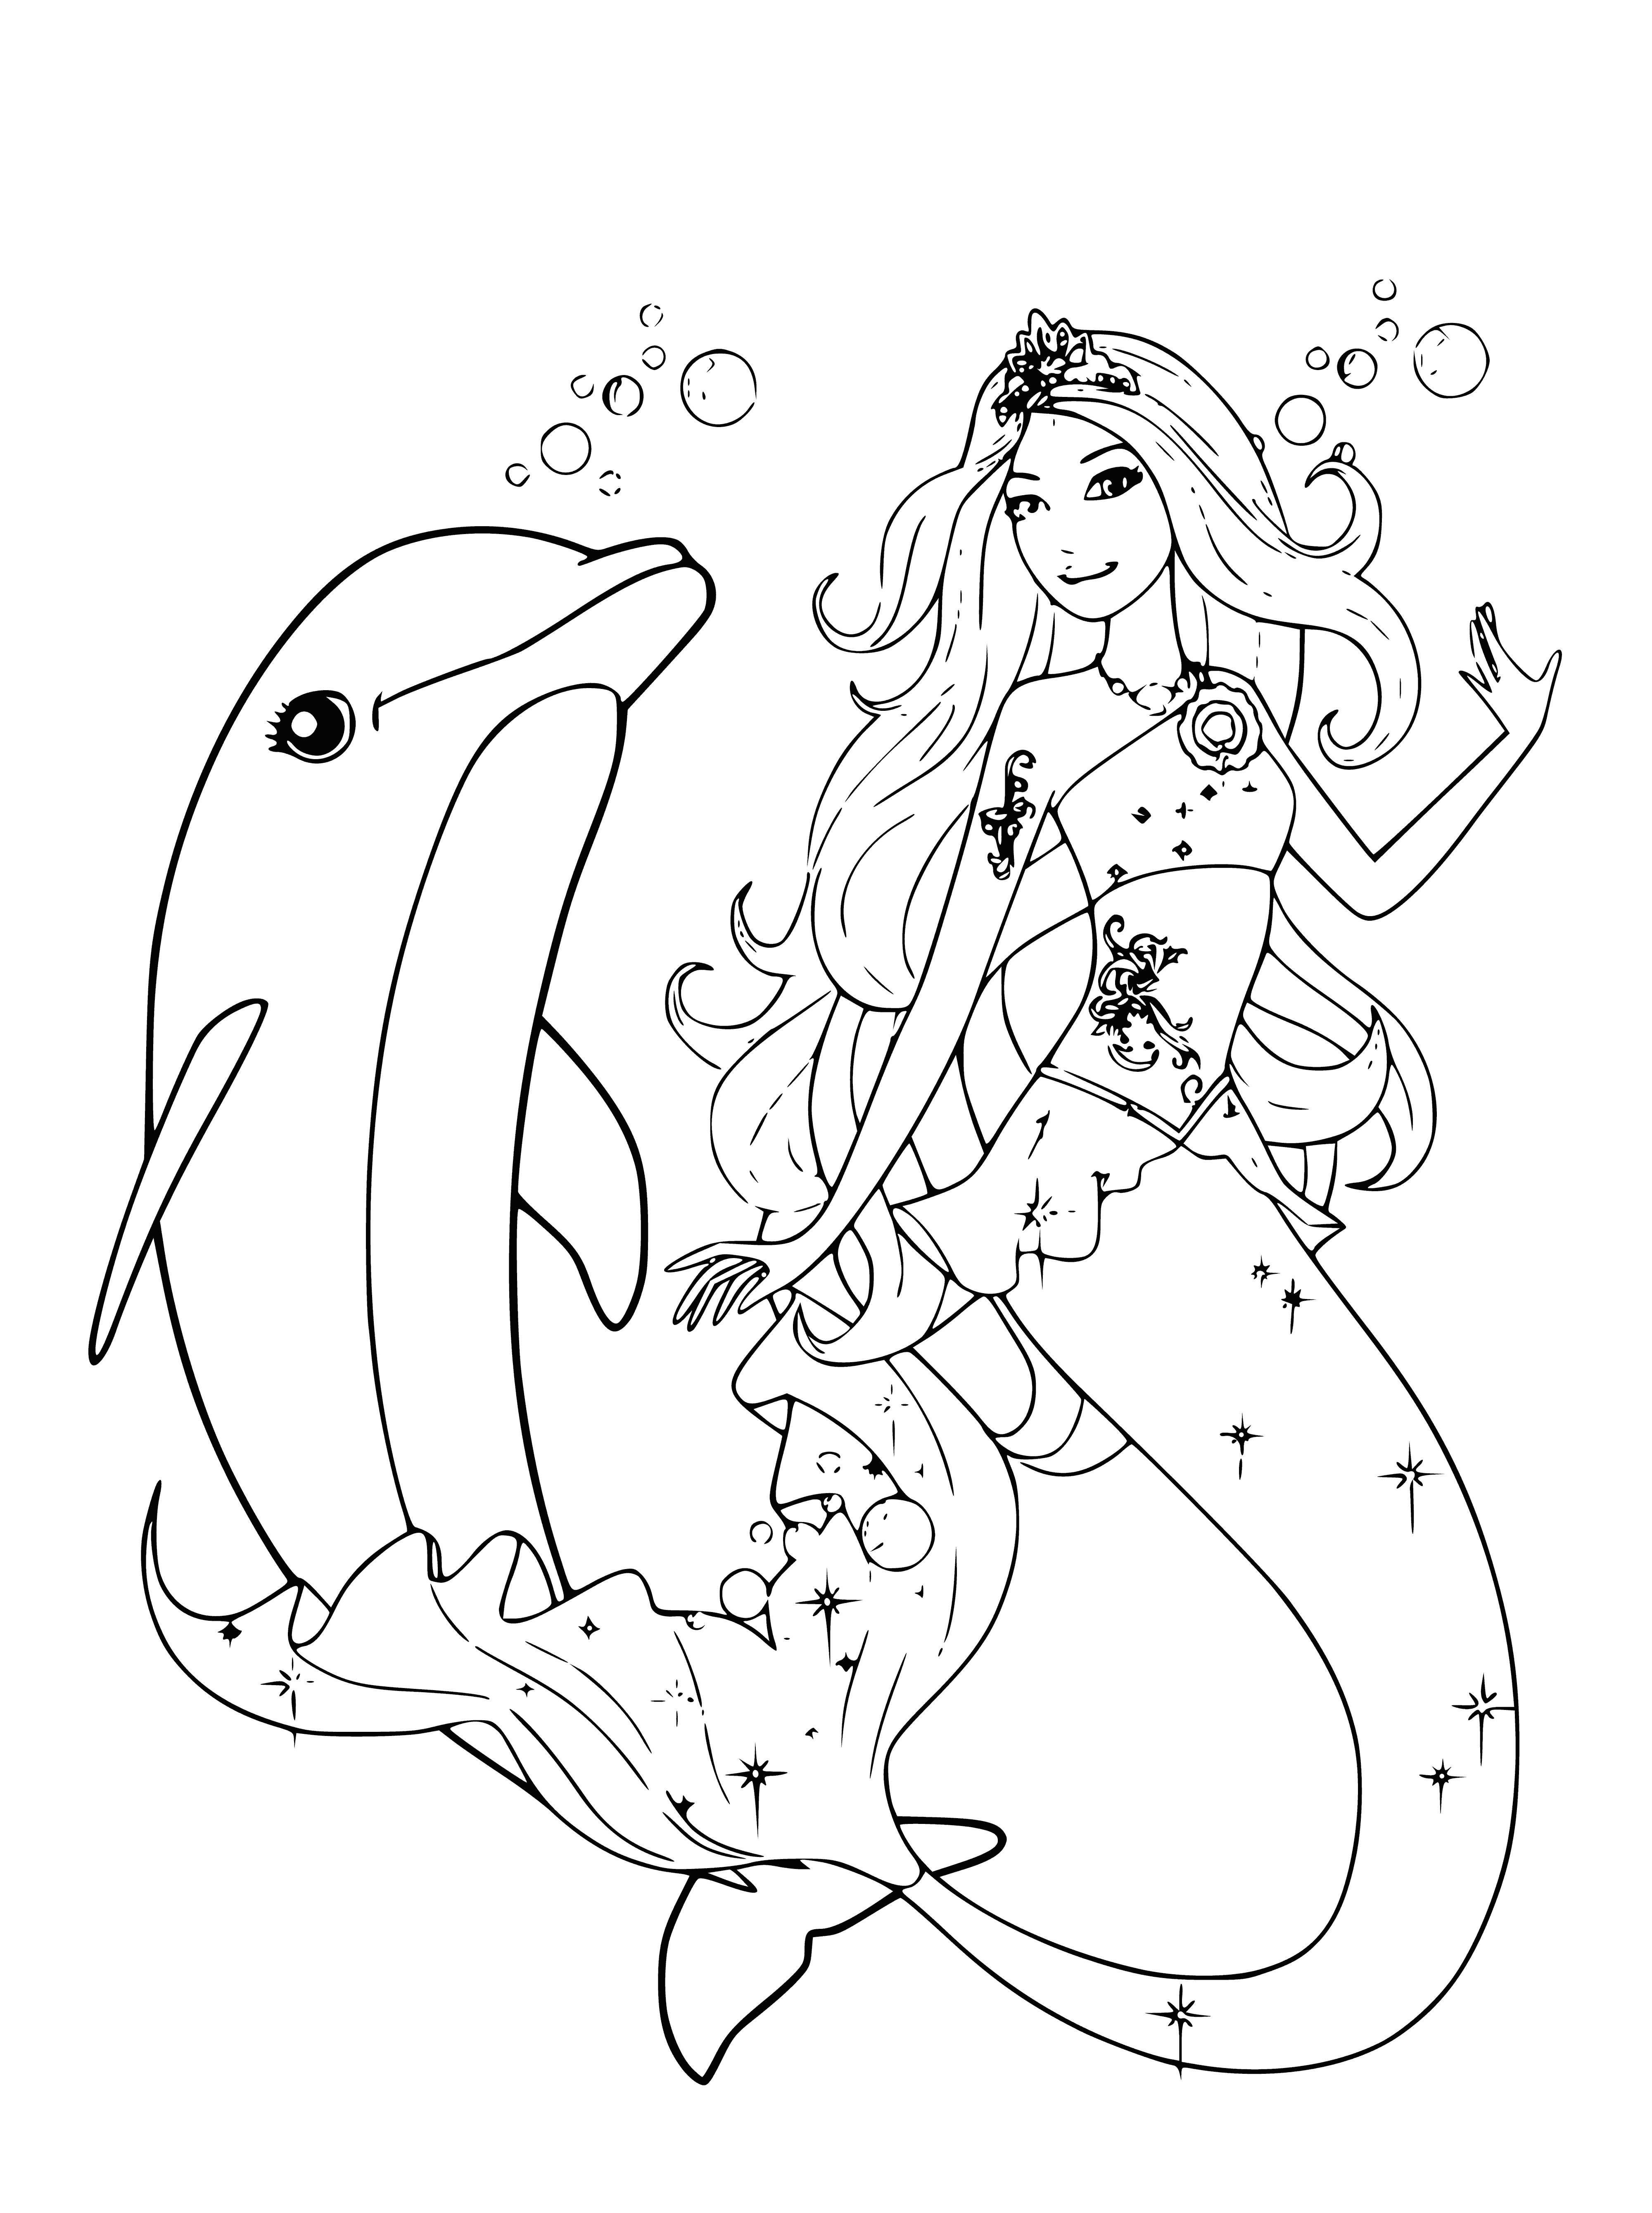 Mermaids and Dolphin coloring page